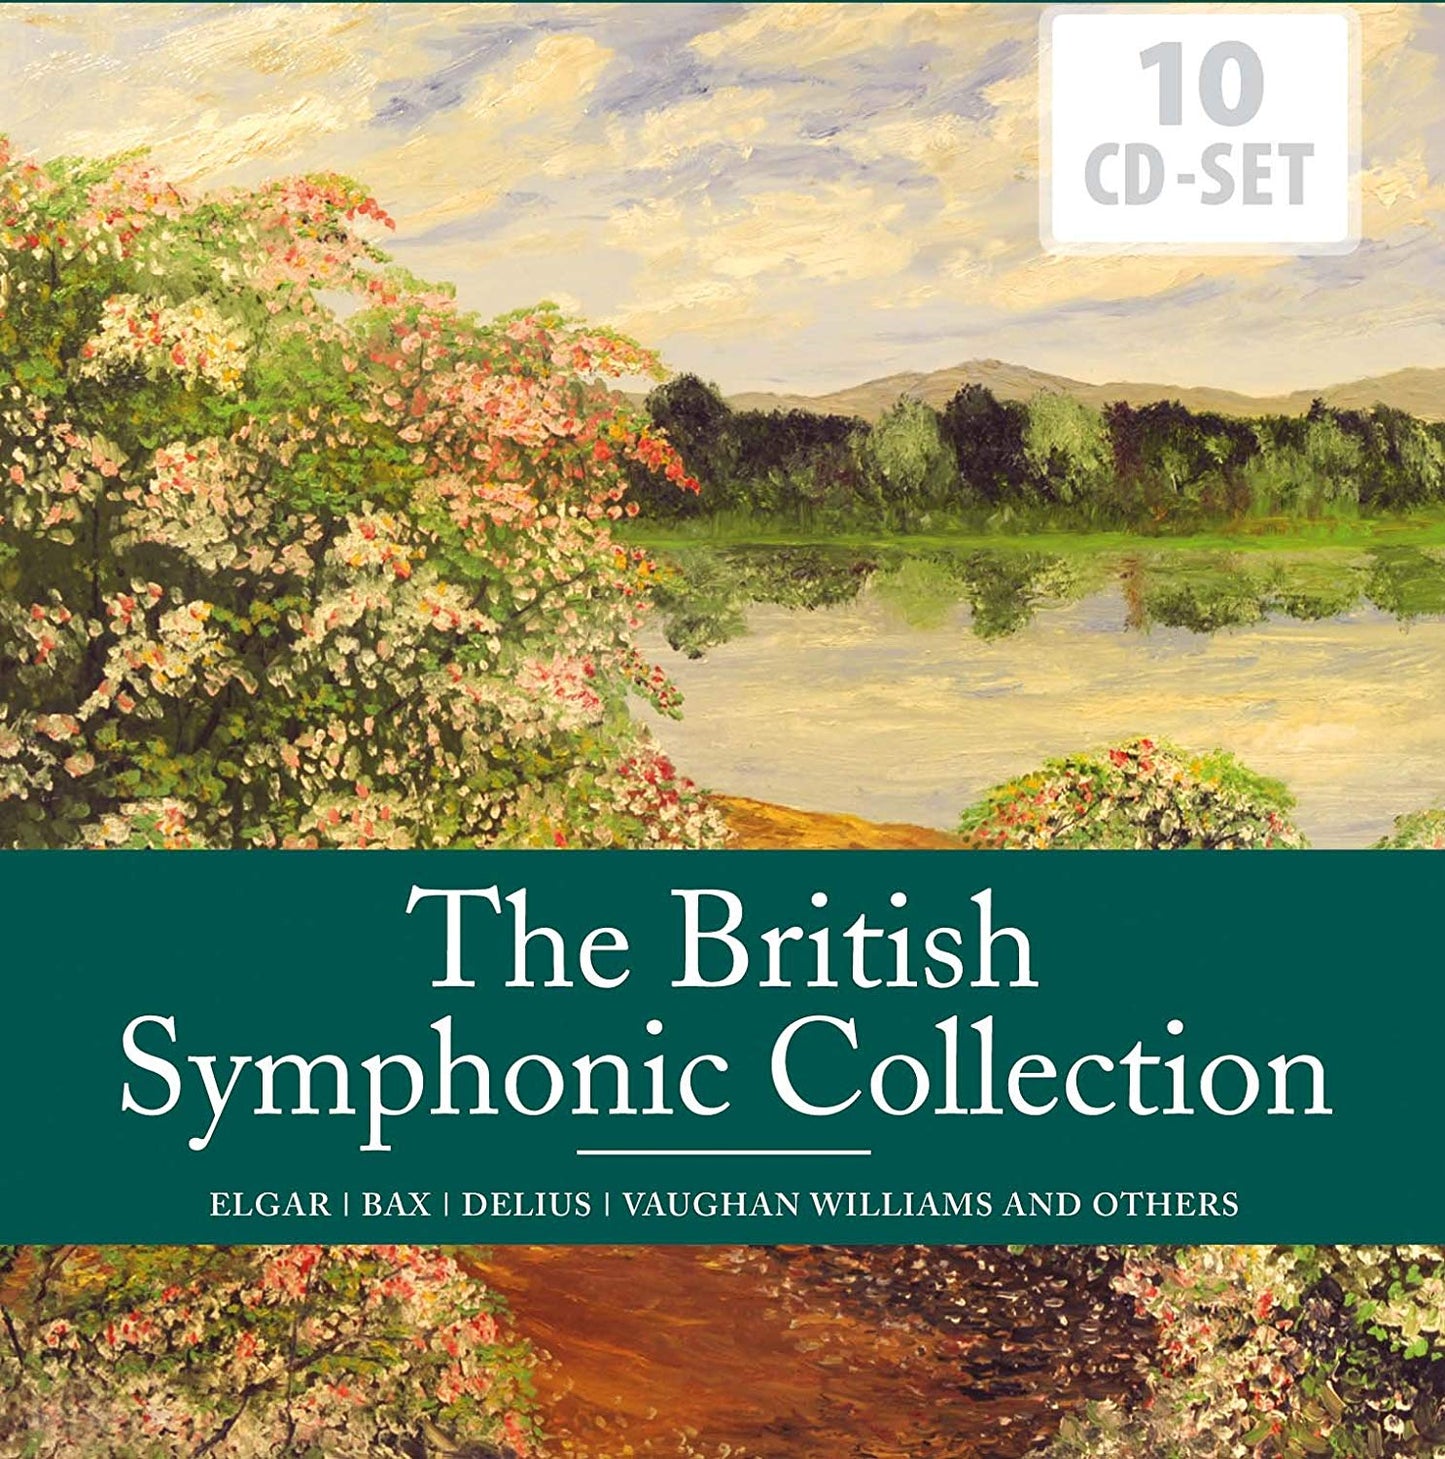 THE BRITISH SYMPHONIC COLLECTION (BAX, ELGAR, VAUGHAN WILLIAMS, DELIUS AND MORE) - BOSTOCK (10 CDS)